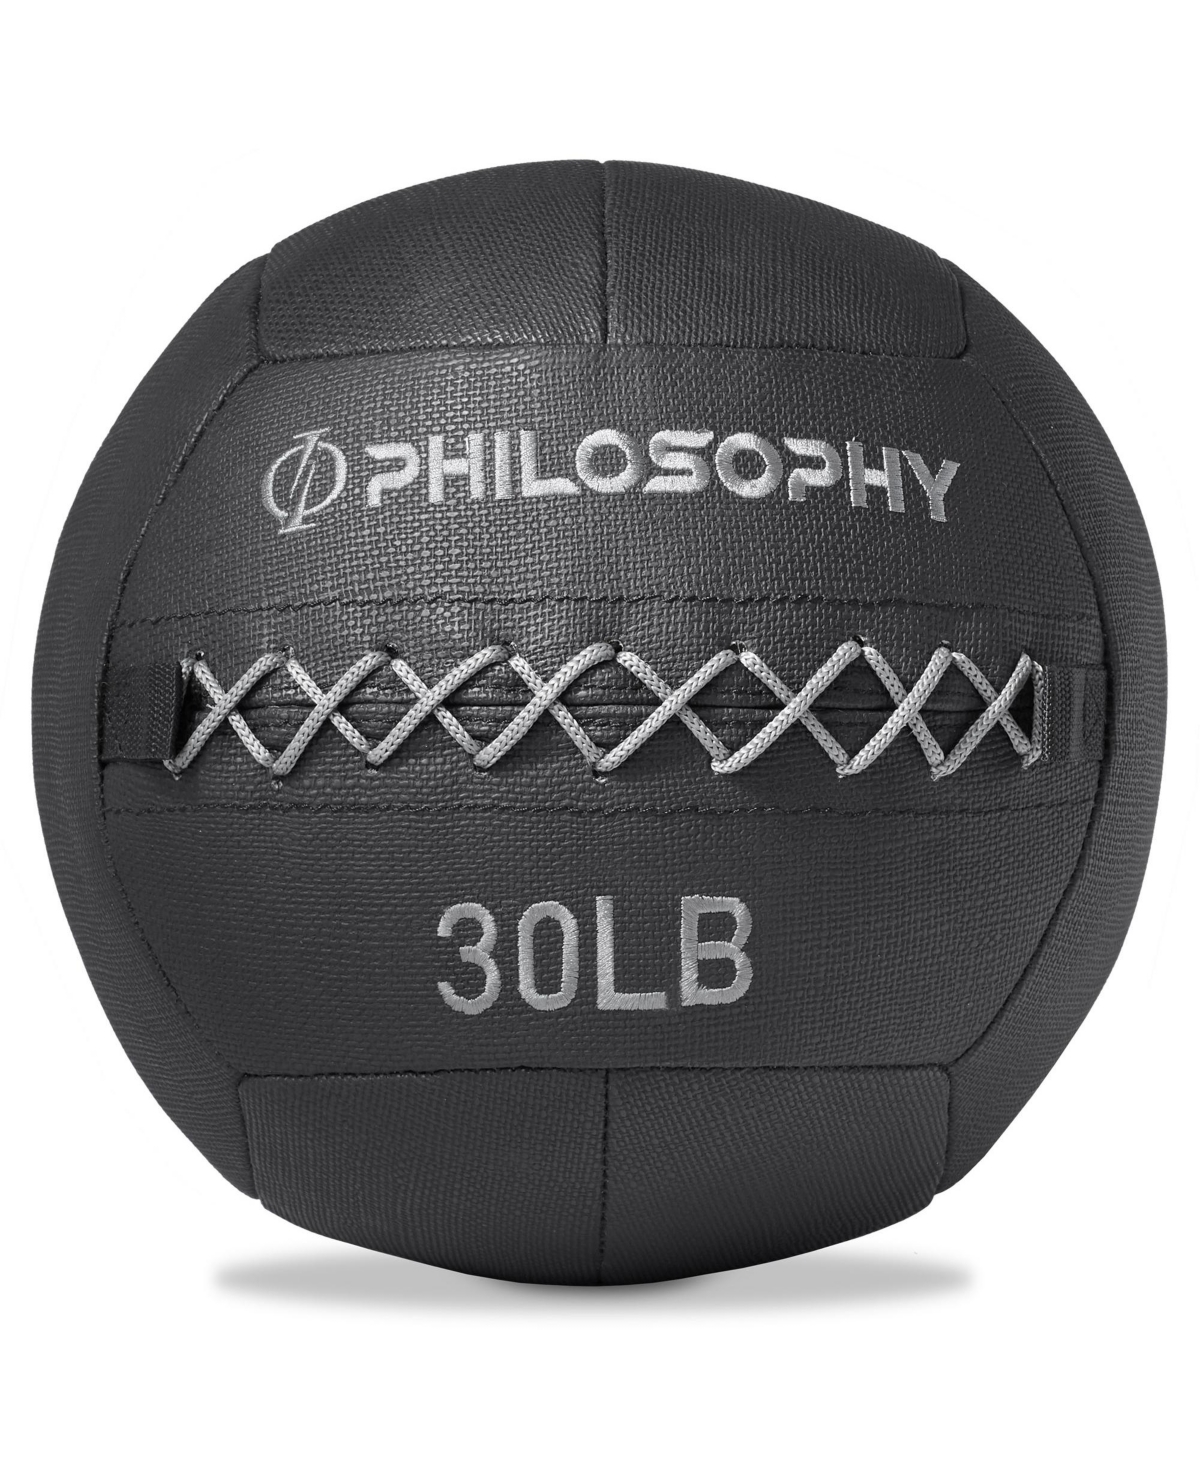 Wall Ball, 30 Lb - Soft Shell Weighted Medicine Ball with Non-Slip Grip - Black